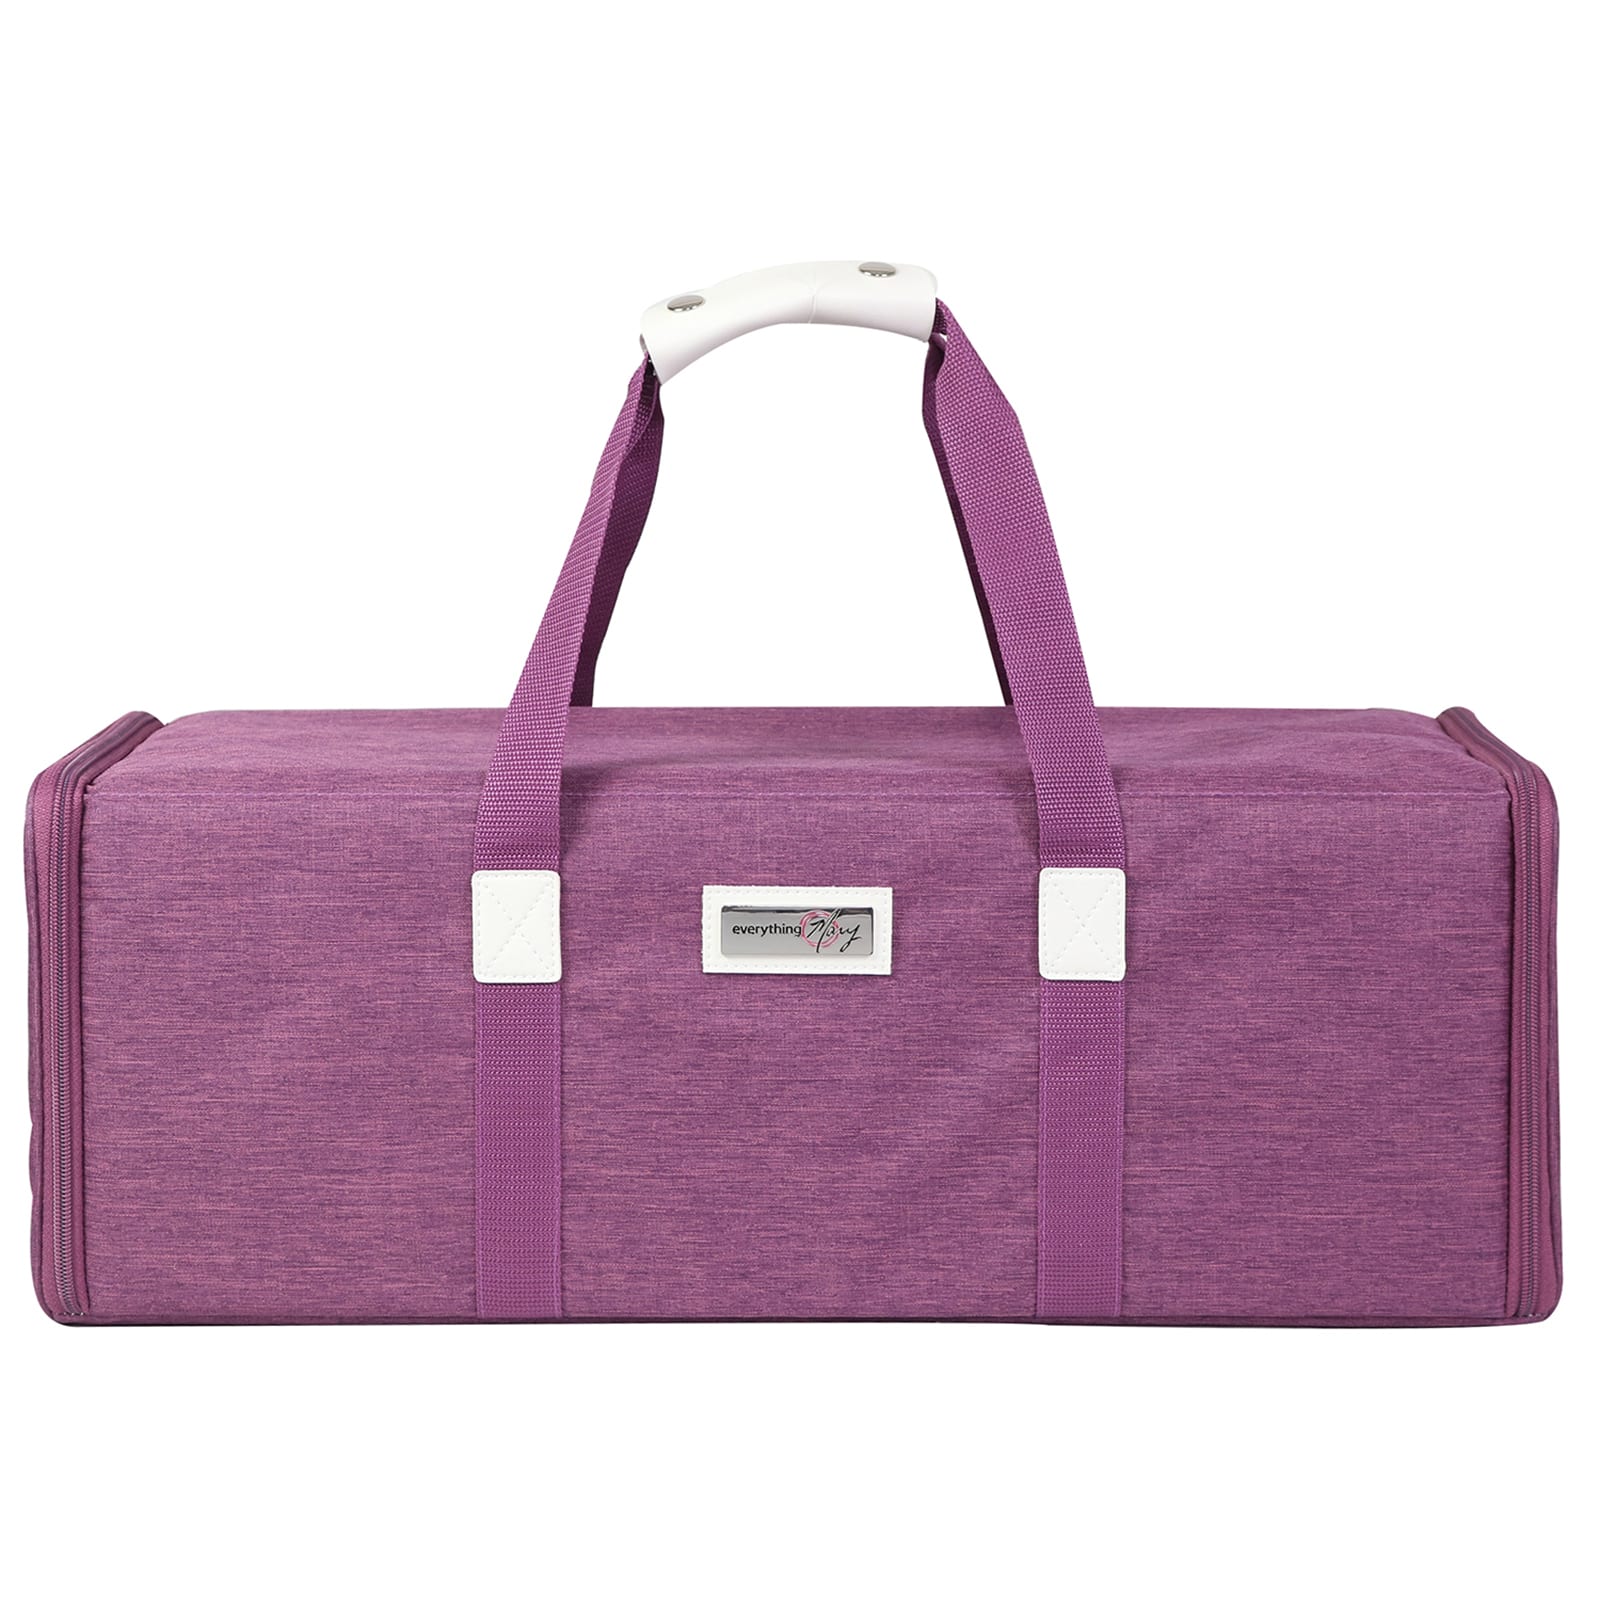  LZXYBIN Carrying Case Bag with Mat Pocket for Cricut Explore  Air 2 Maker 3 Bag Carrying Case Purple